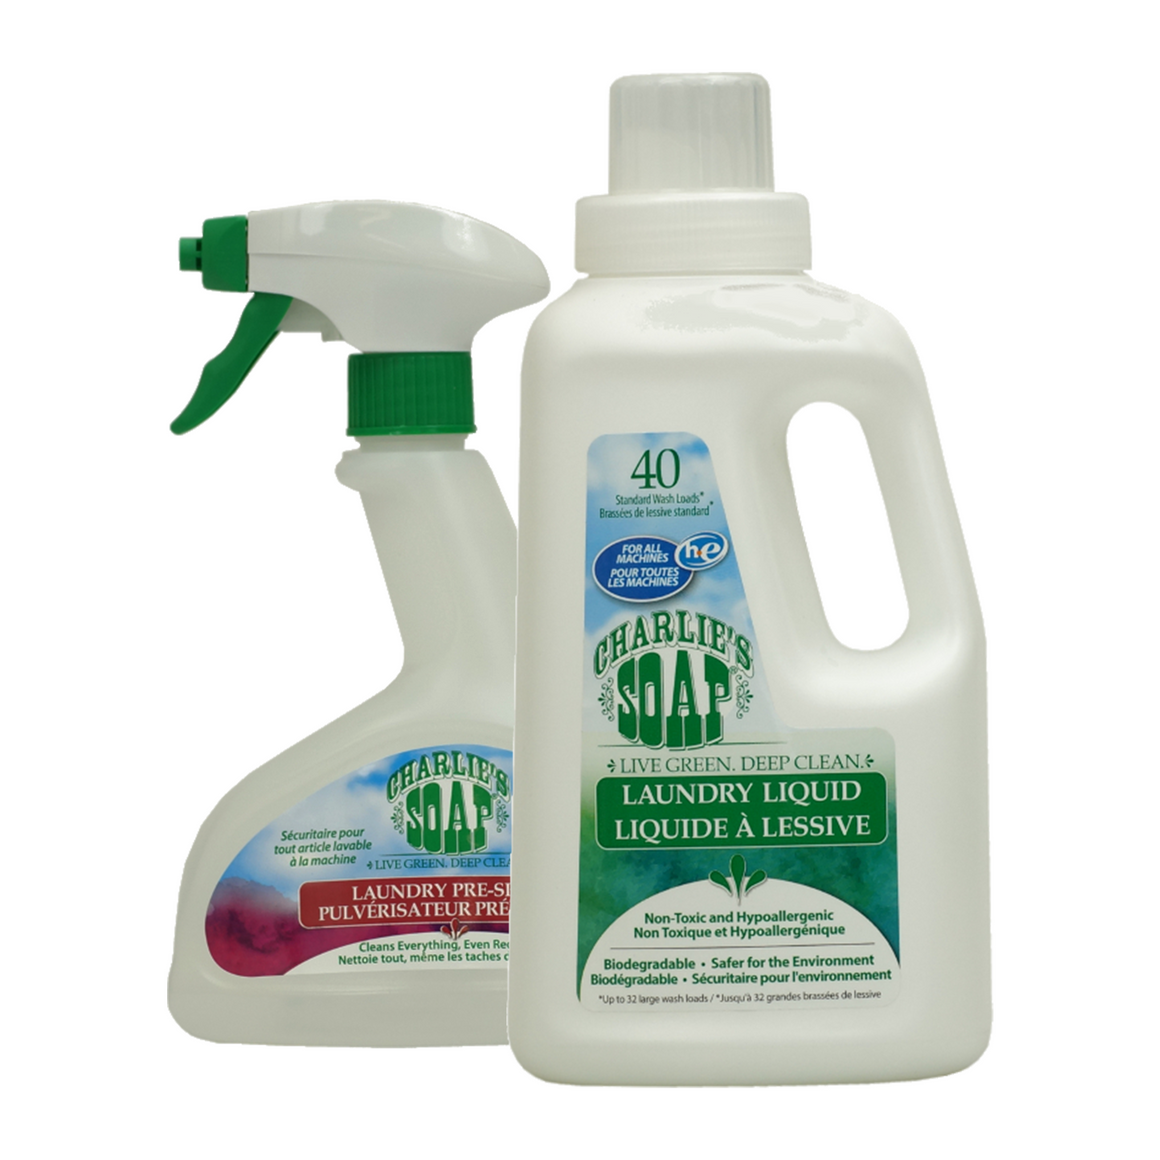 Charlie's Soap Laundry and Cleaning Bundle